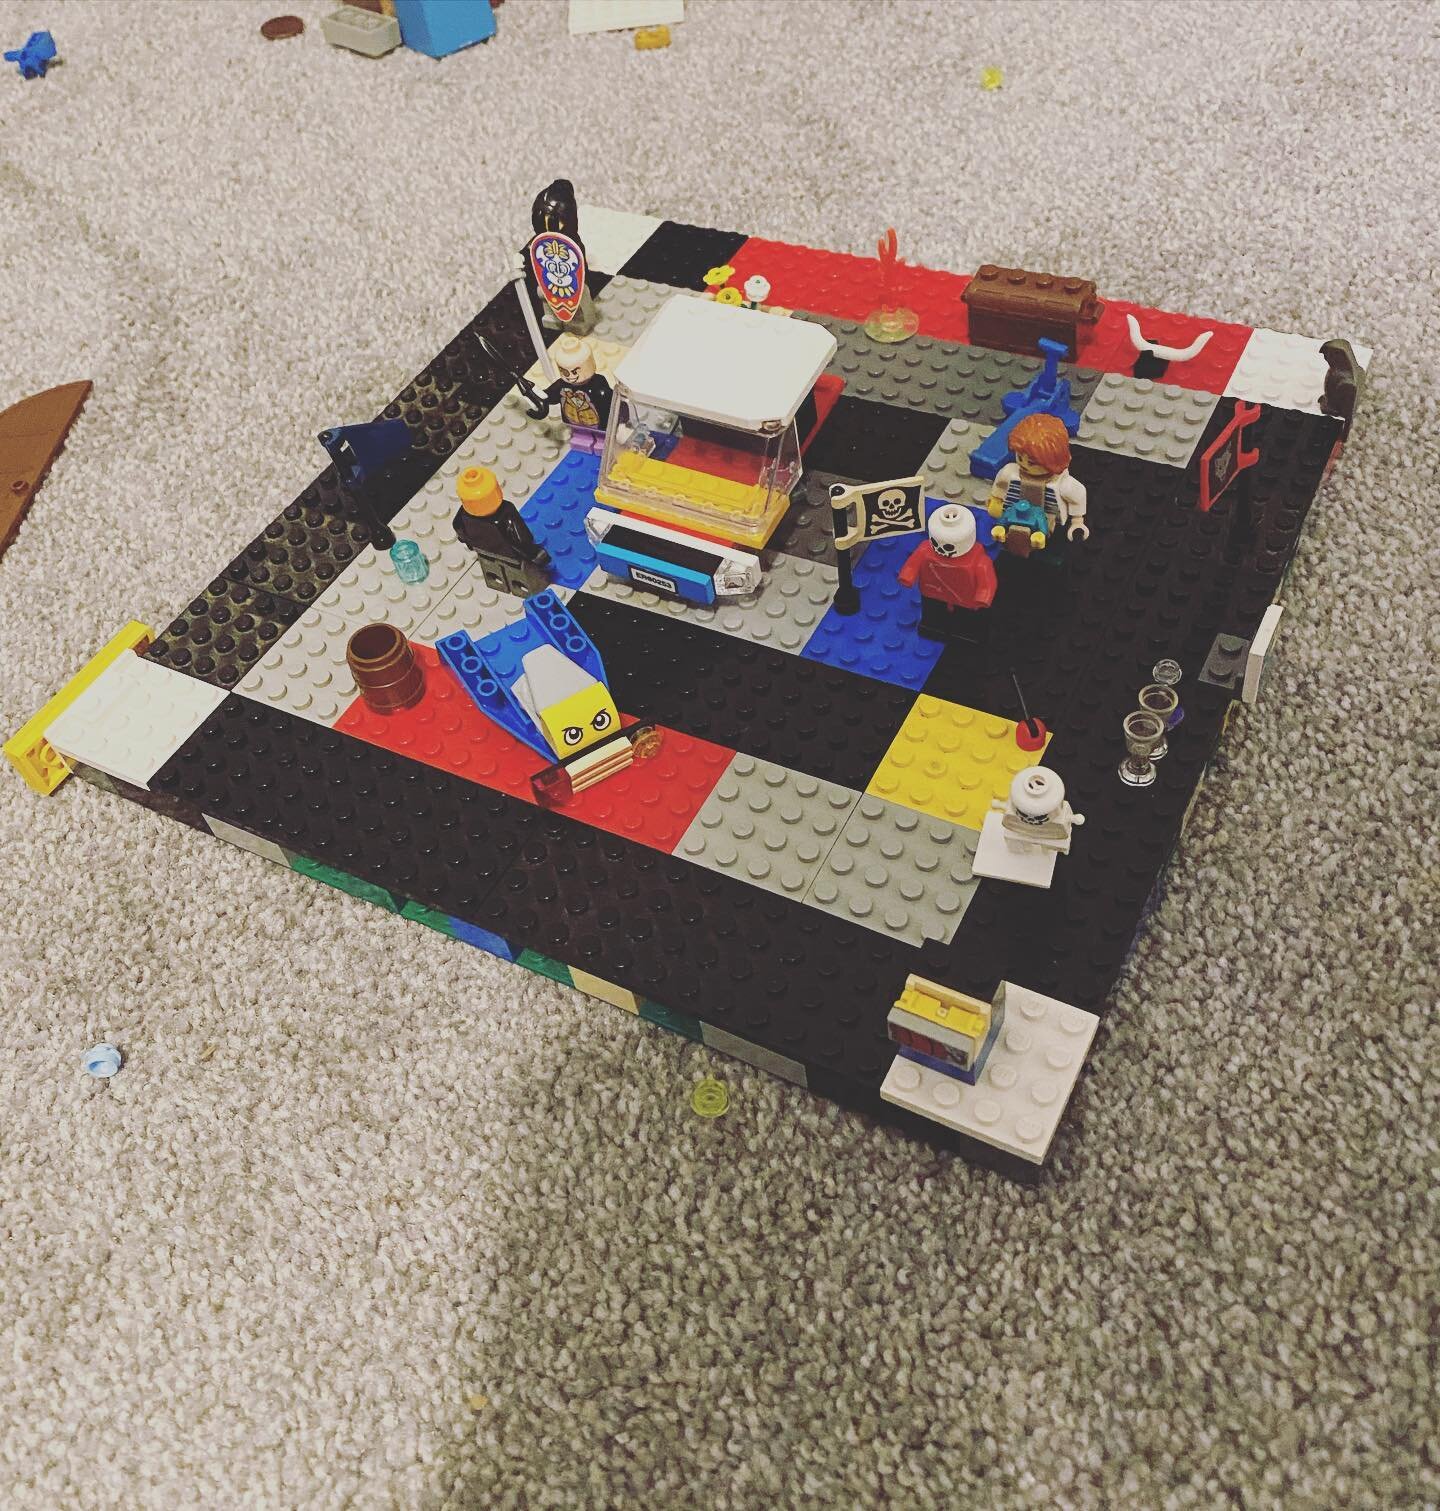 When your son co-ops your MILS Base prototype for his own unique creation. Gearing up for #avengerstower2022 #legosareforadultstoo #lego #legomoc